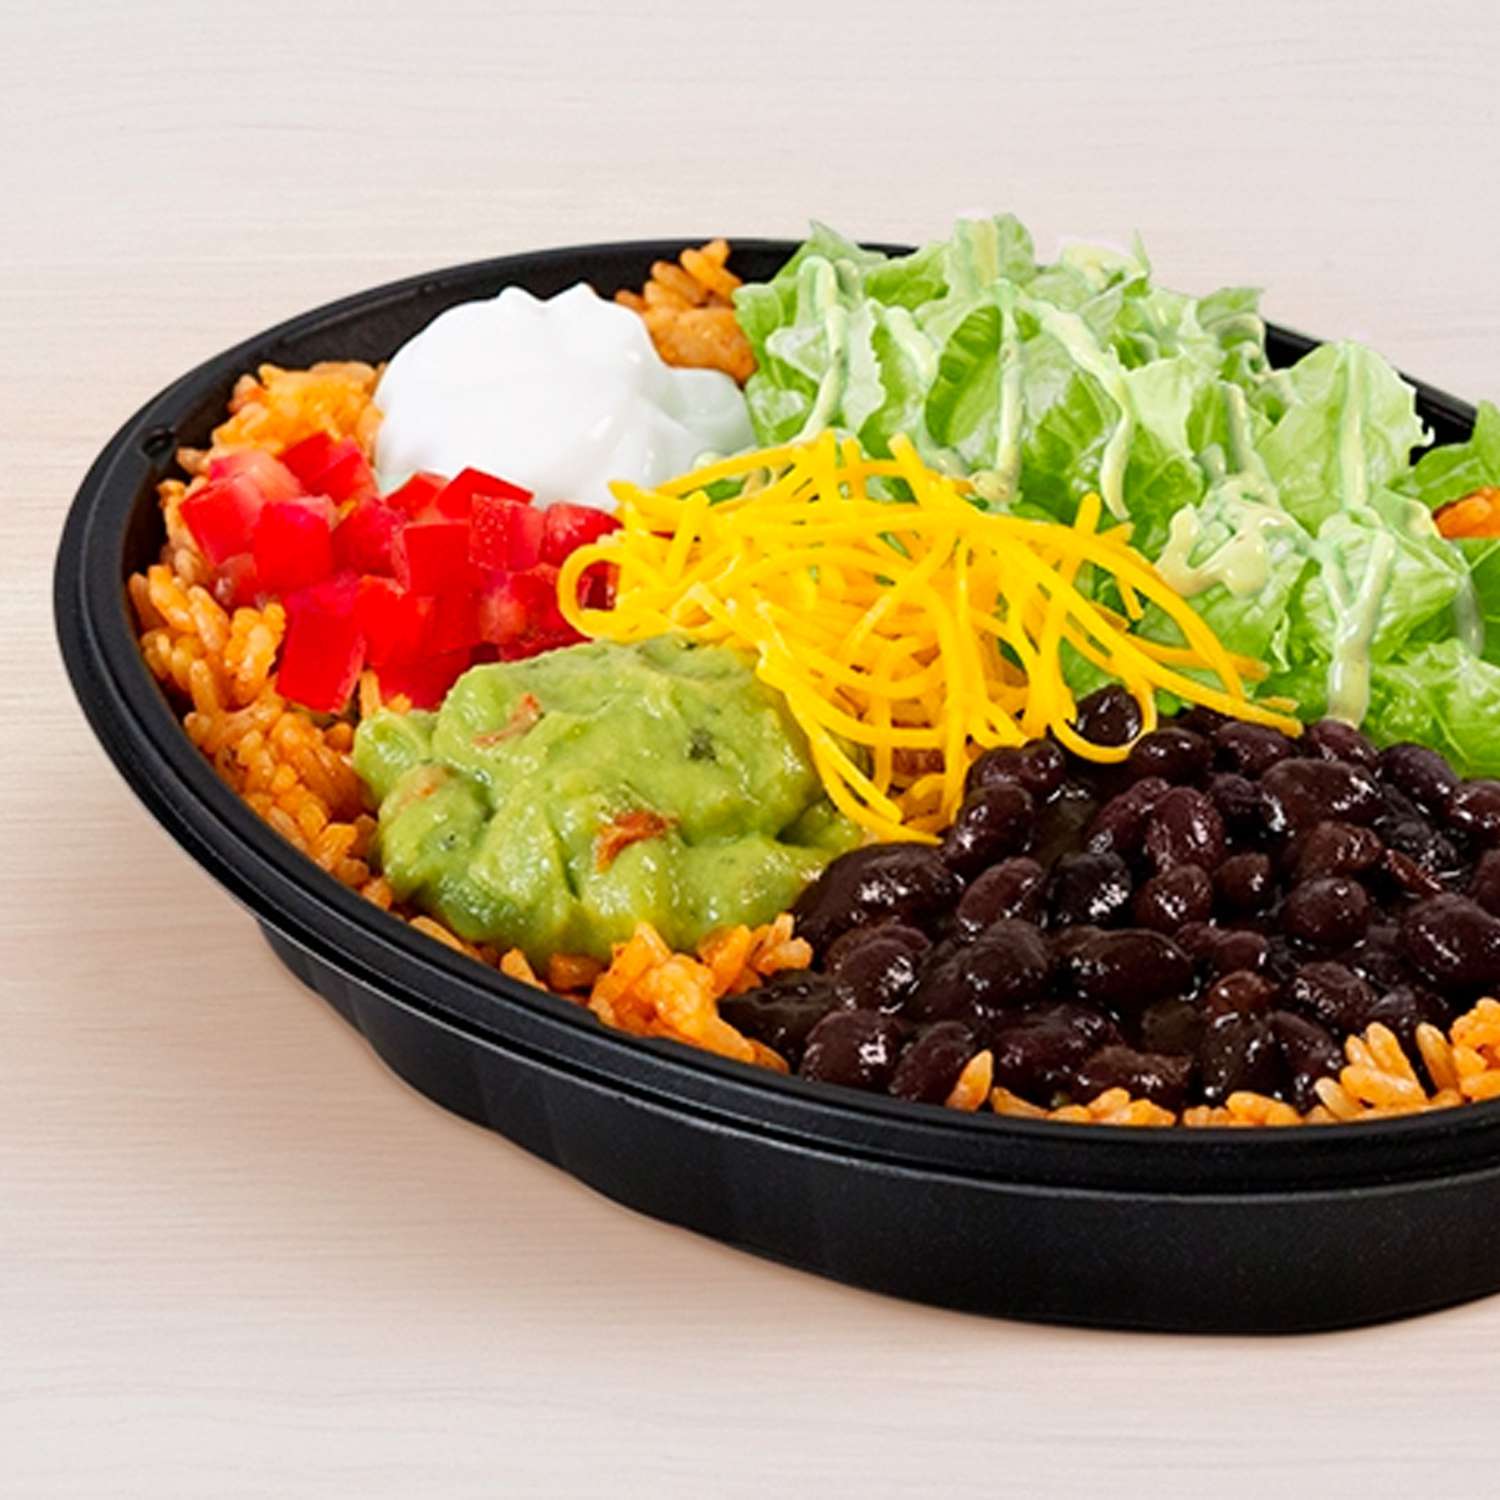 Taco Bell Healthy Options